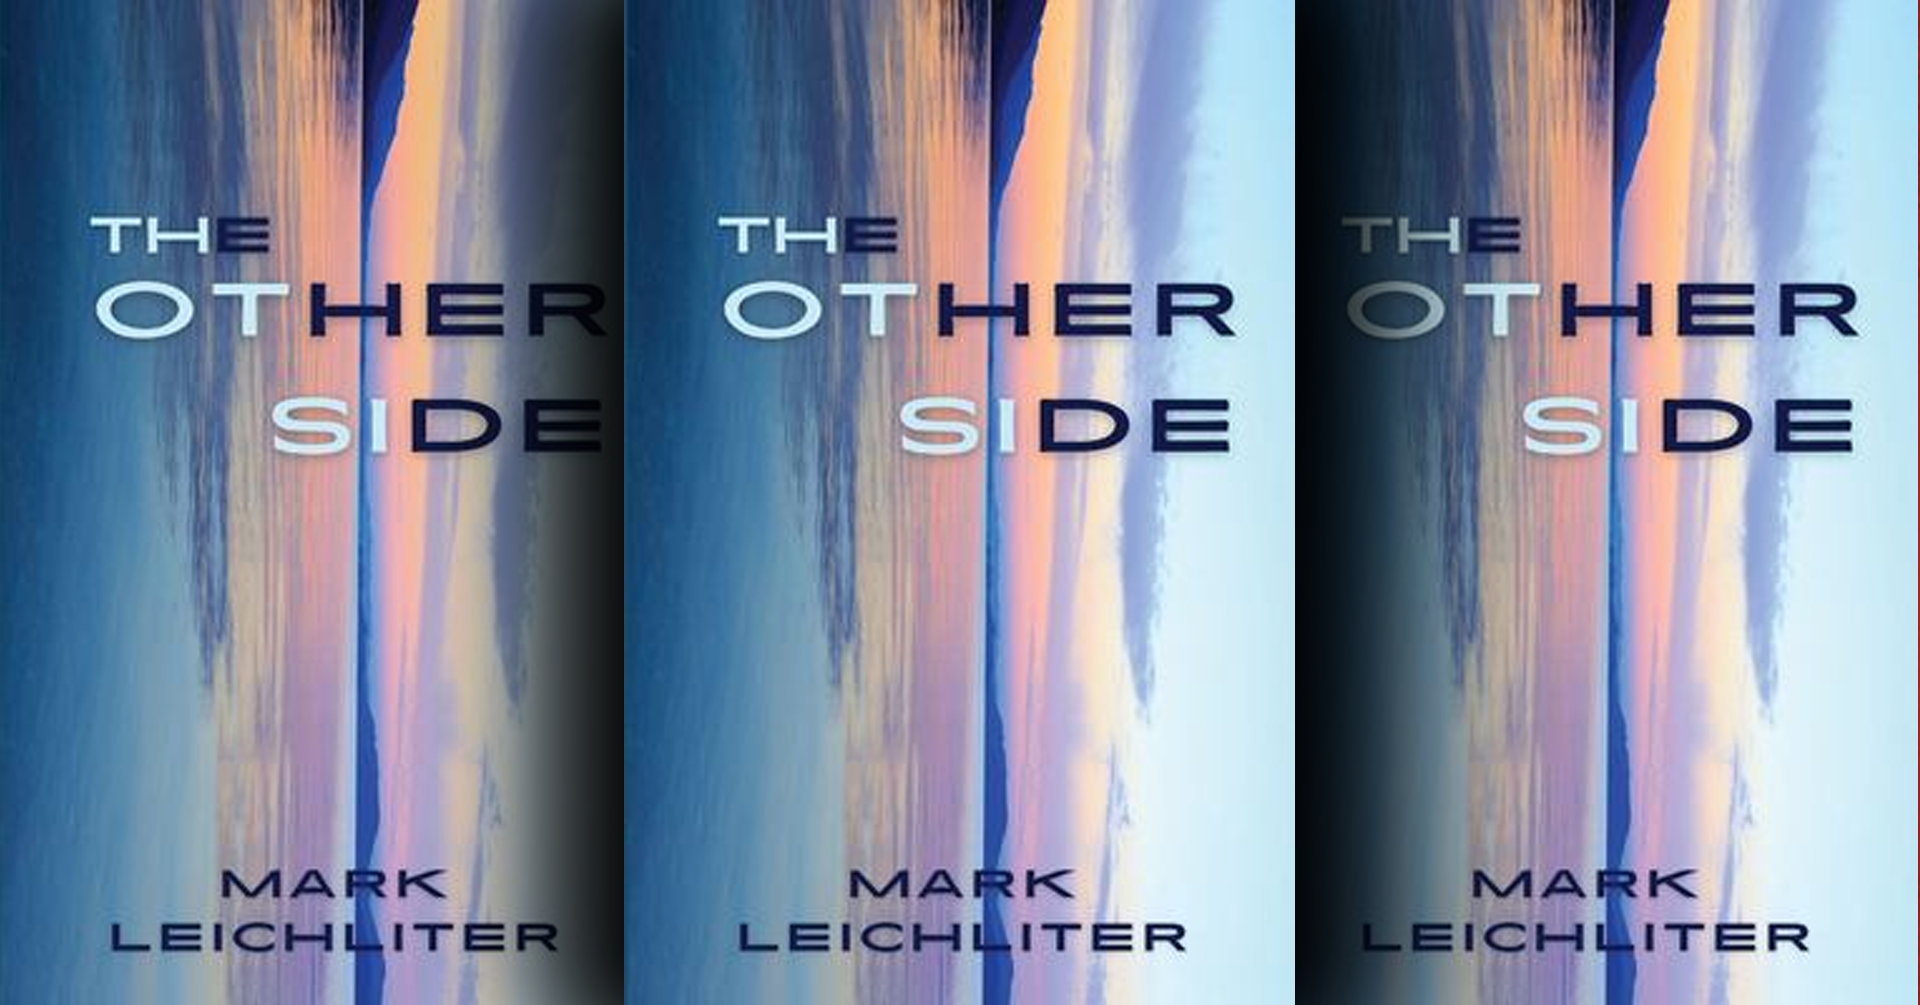 The Other Side by Mark Leichliter